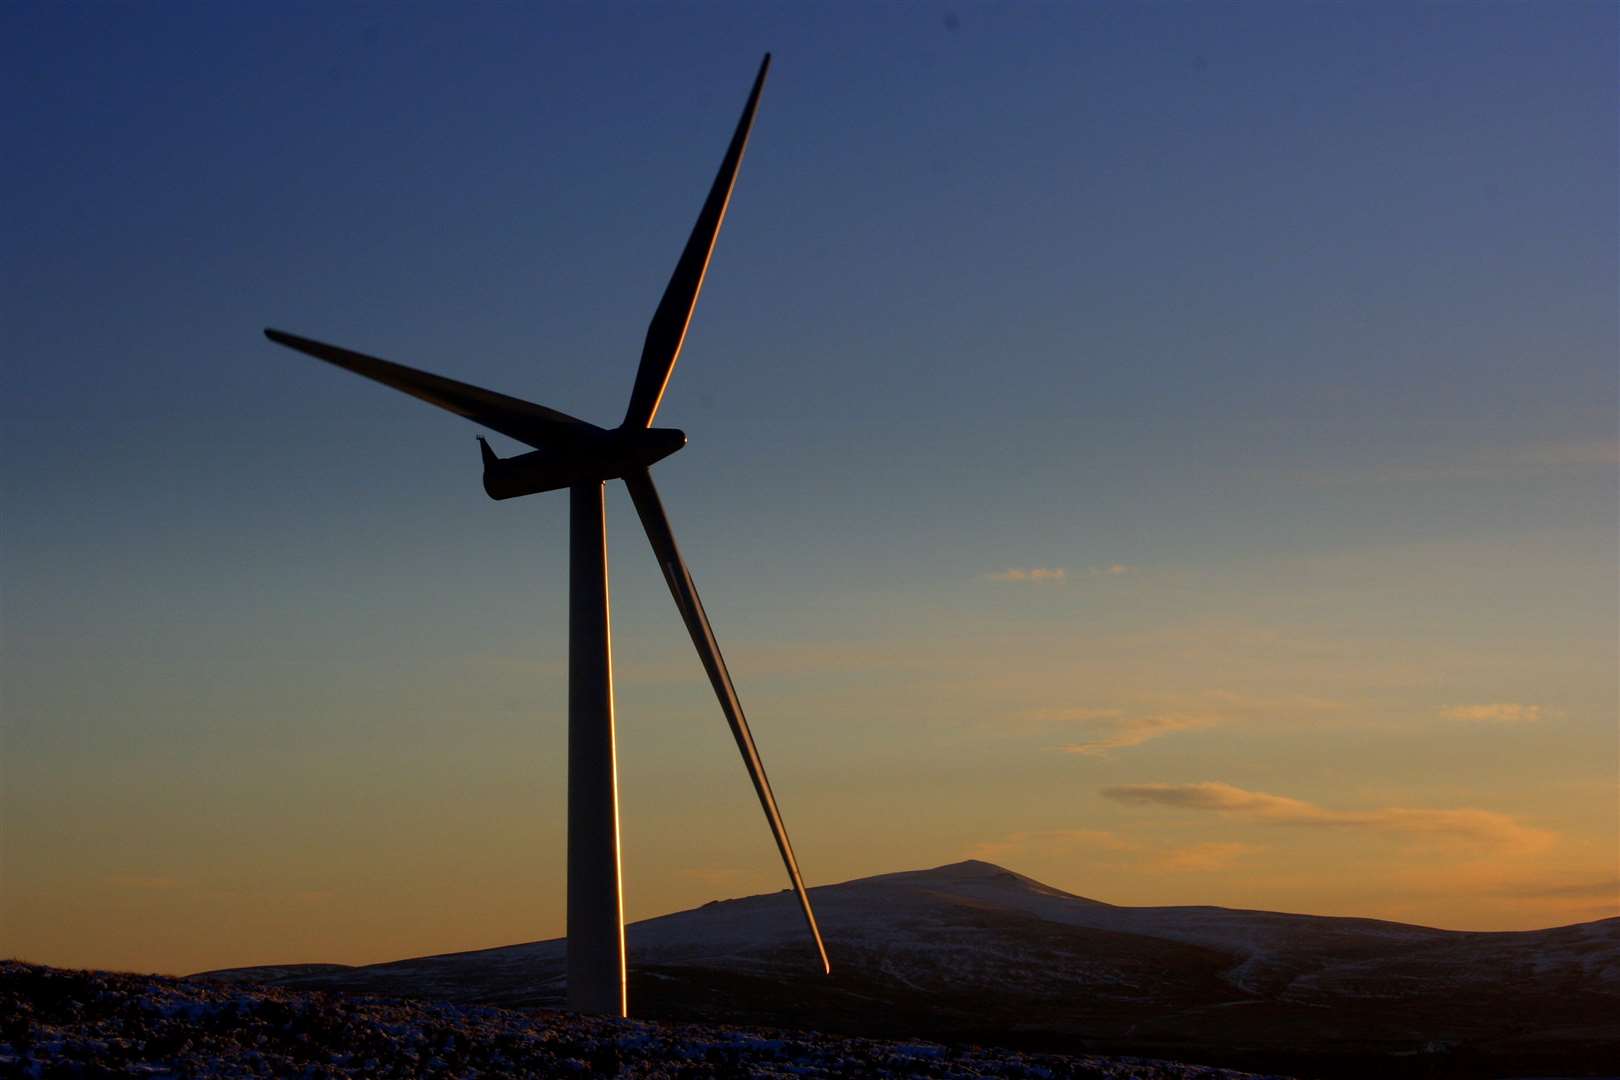 Working together will enable new renewable energy projects to be completed in the north.